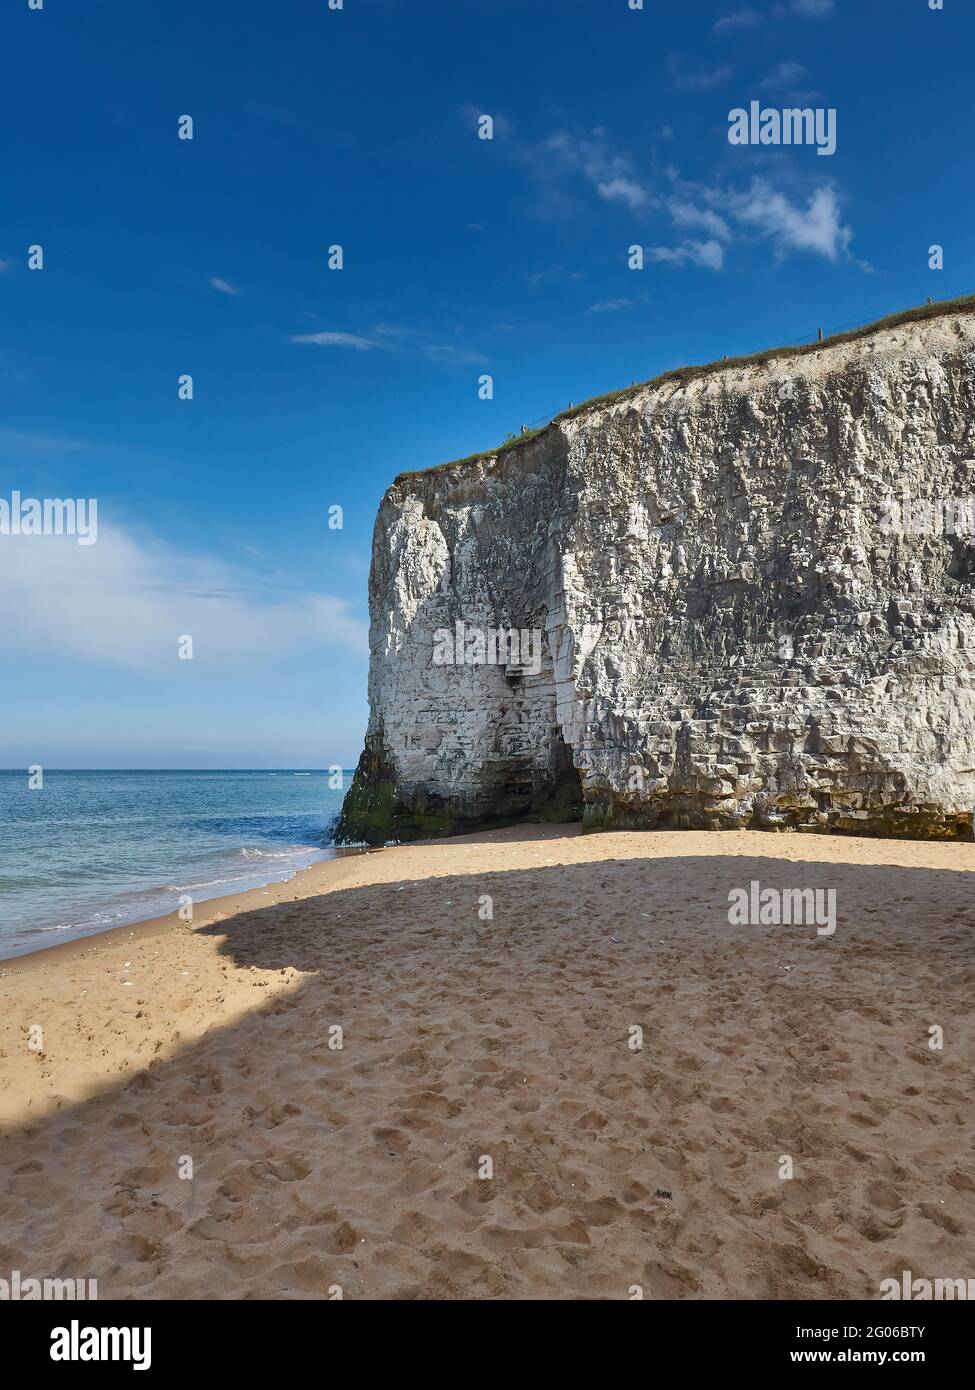 Gentle waves roll in from a blue sea to break on golden sand under a white chalk cliff with a summery blue sky with fluffy white clouds overhead. Stock Photo